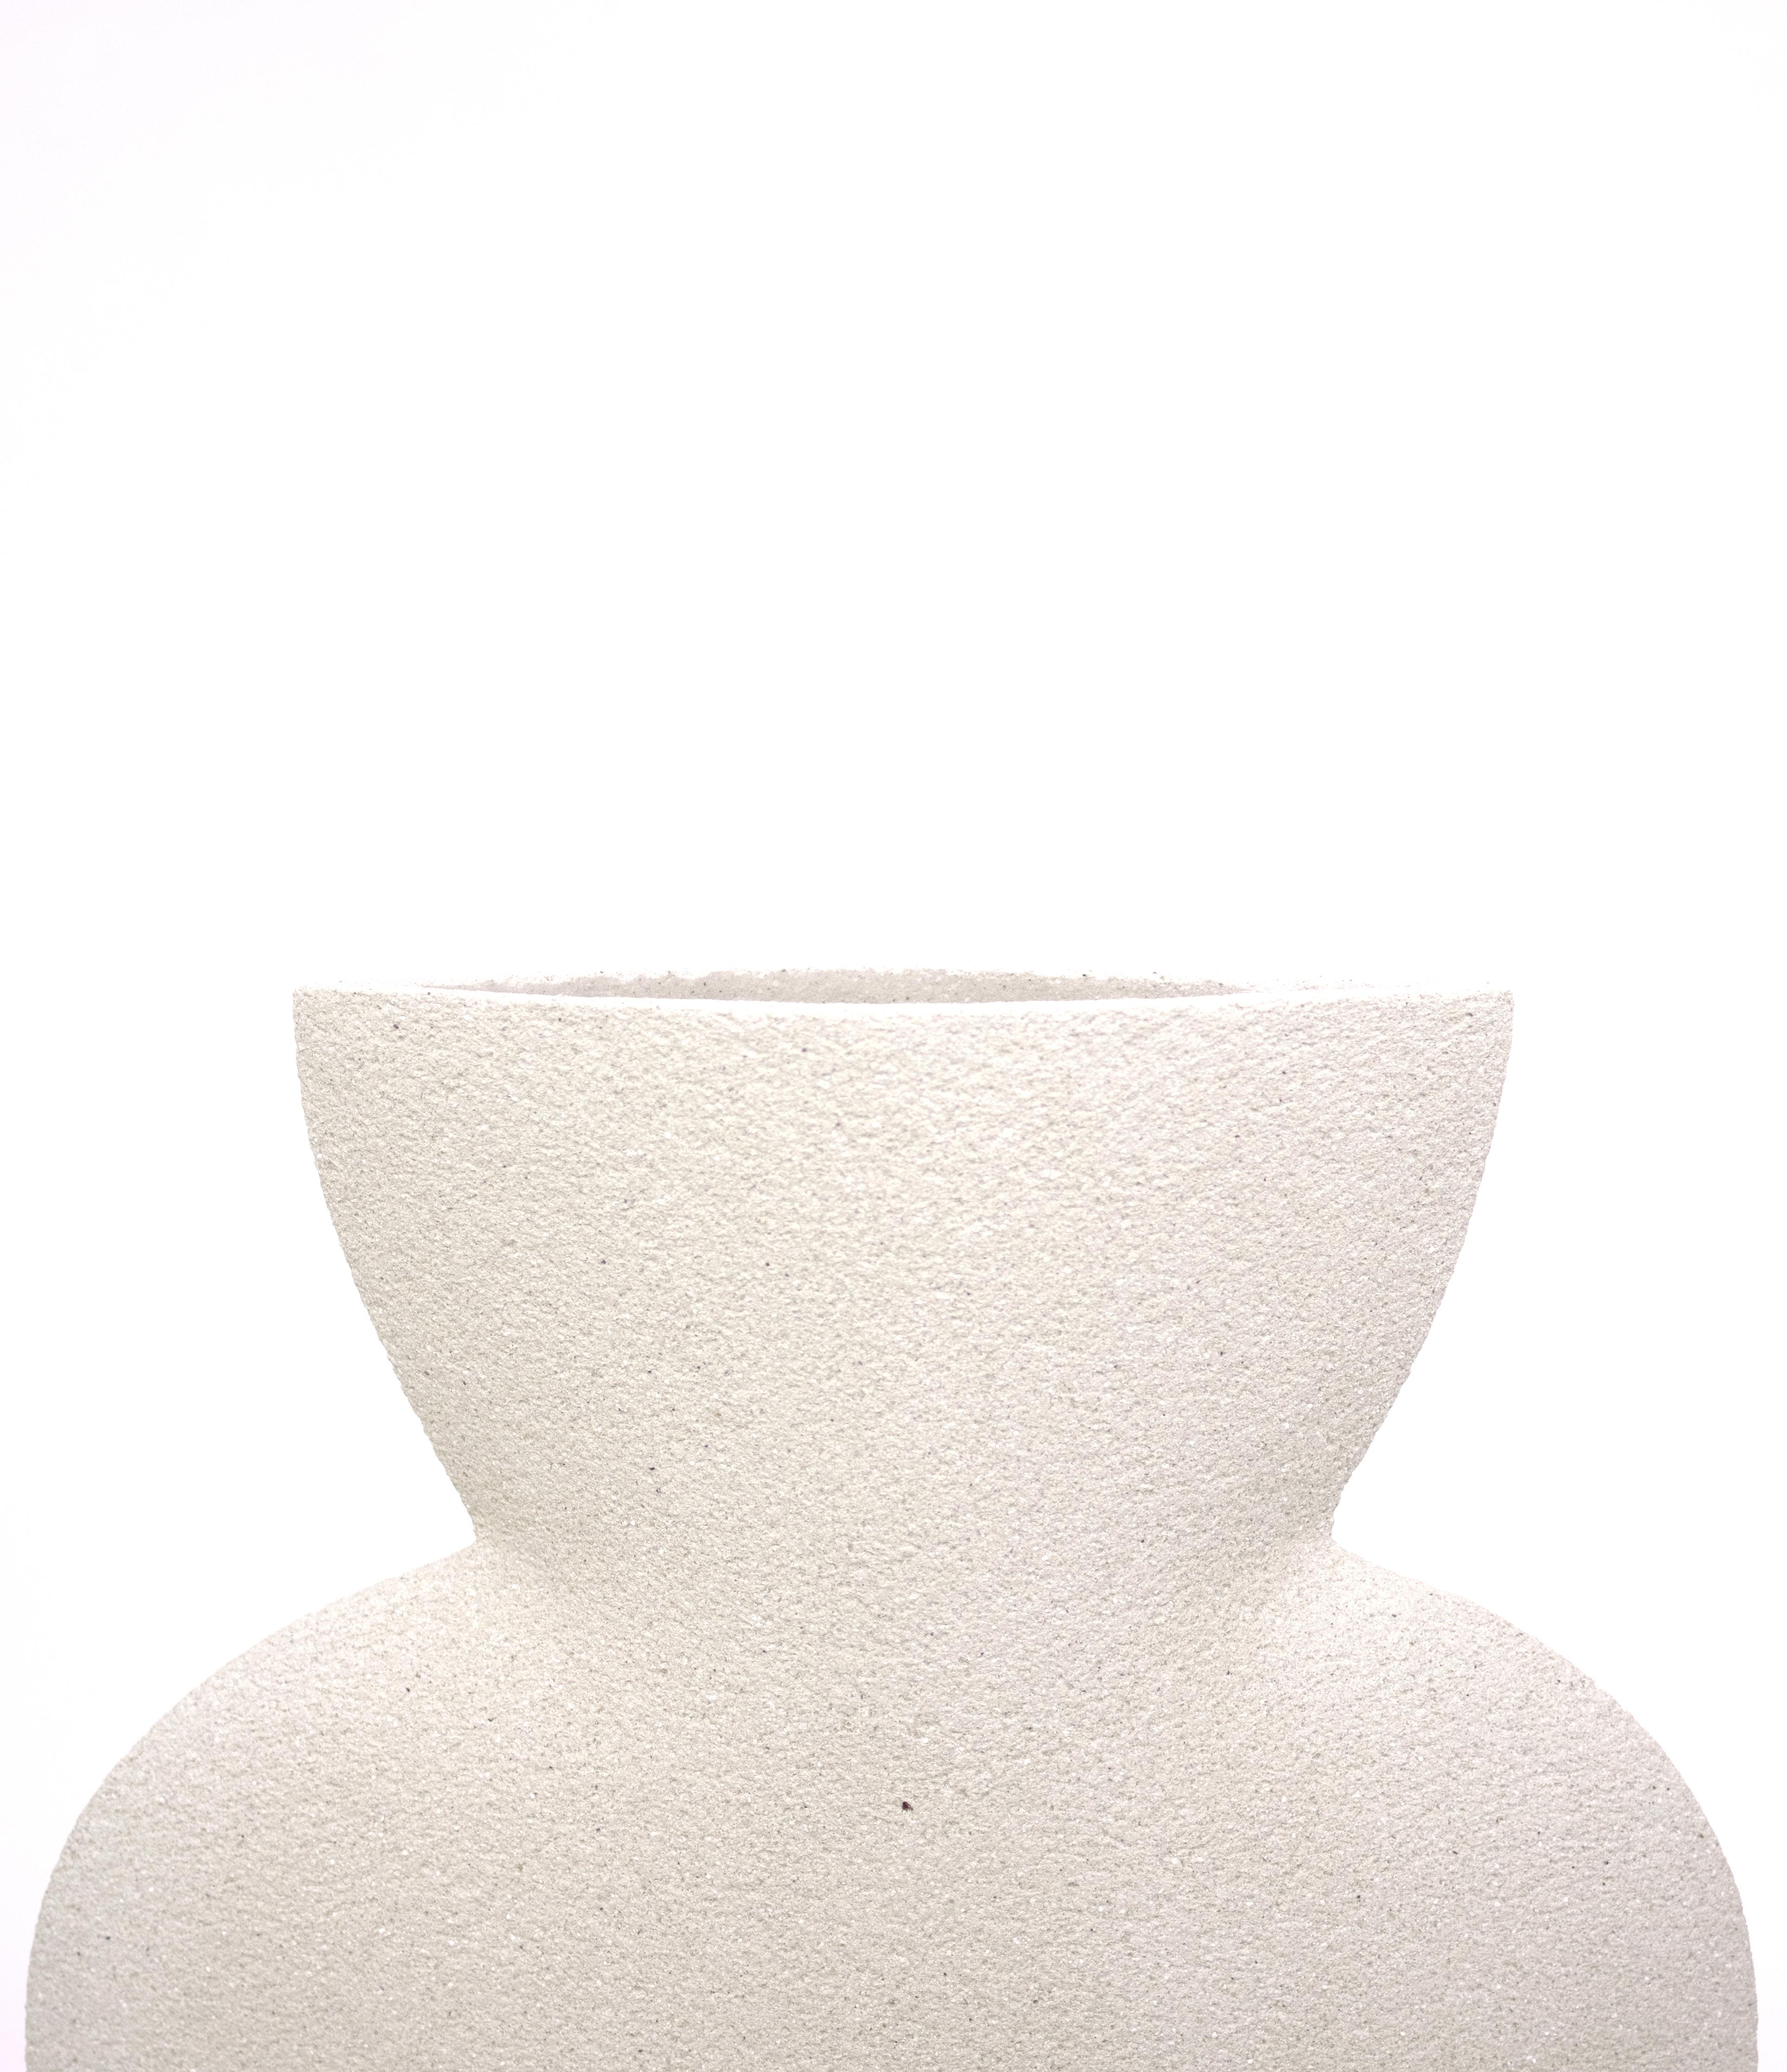 Minimalist 21st Century Amphora Vase in White Ceramic, Hand-Crafted in France For Sale